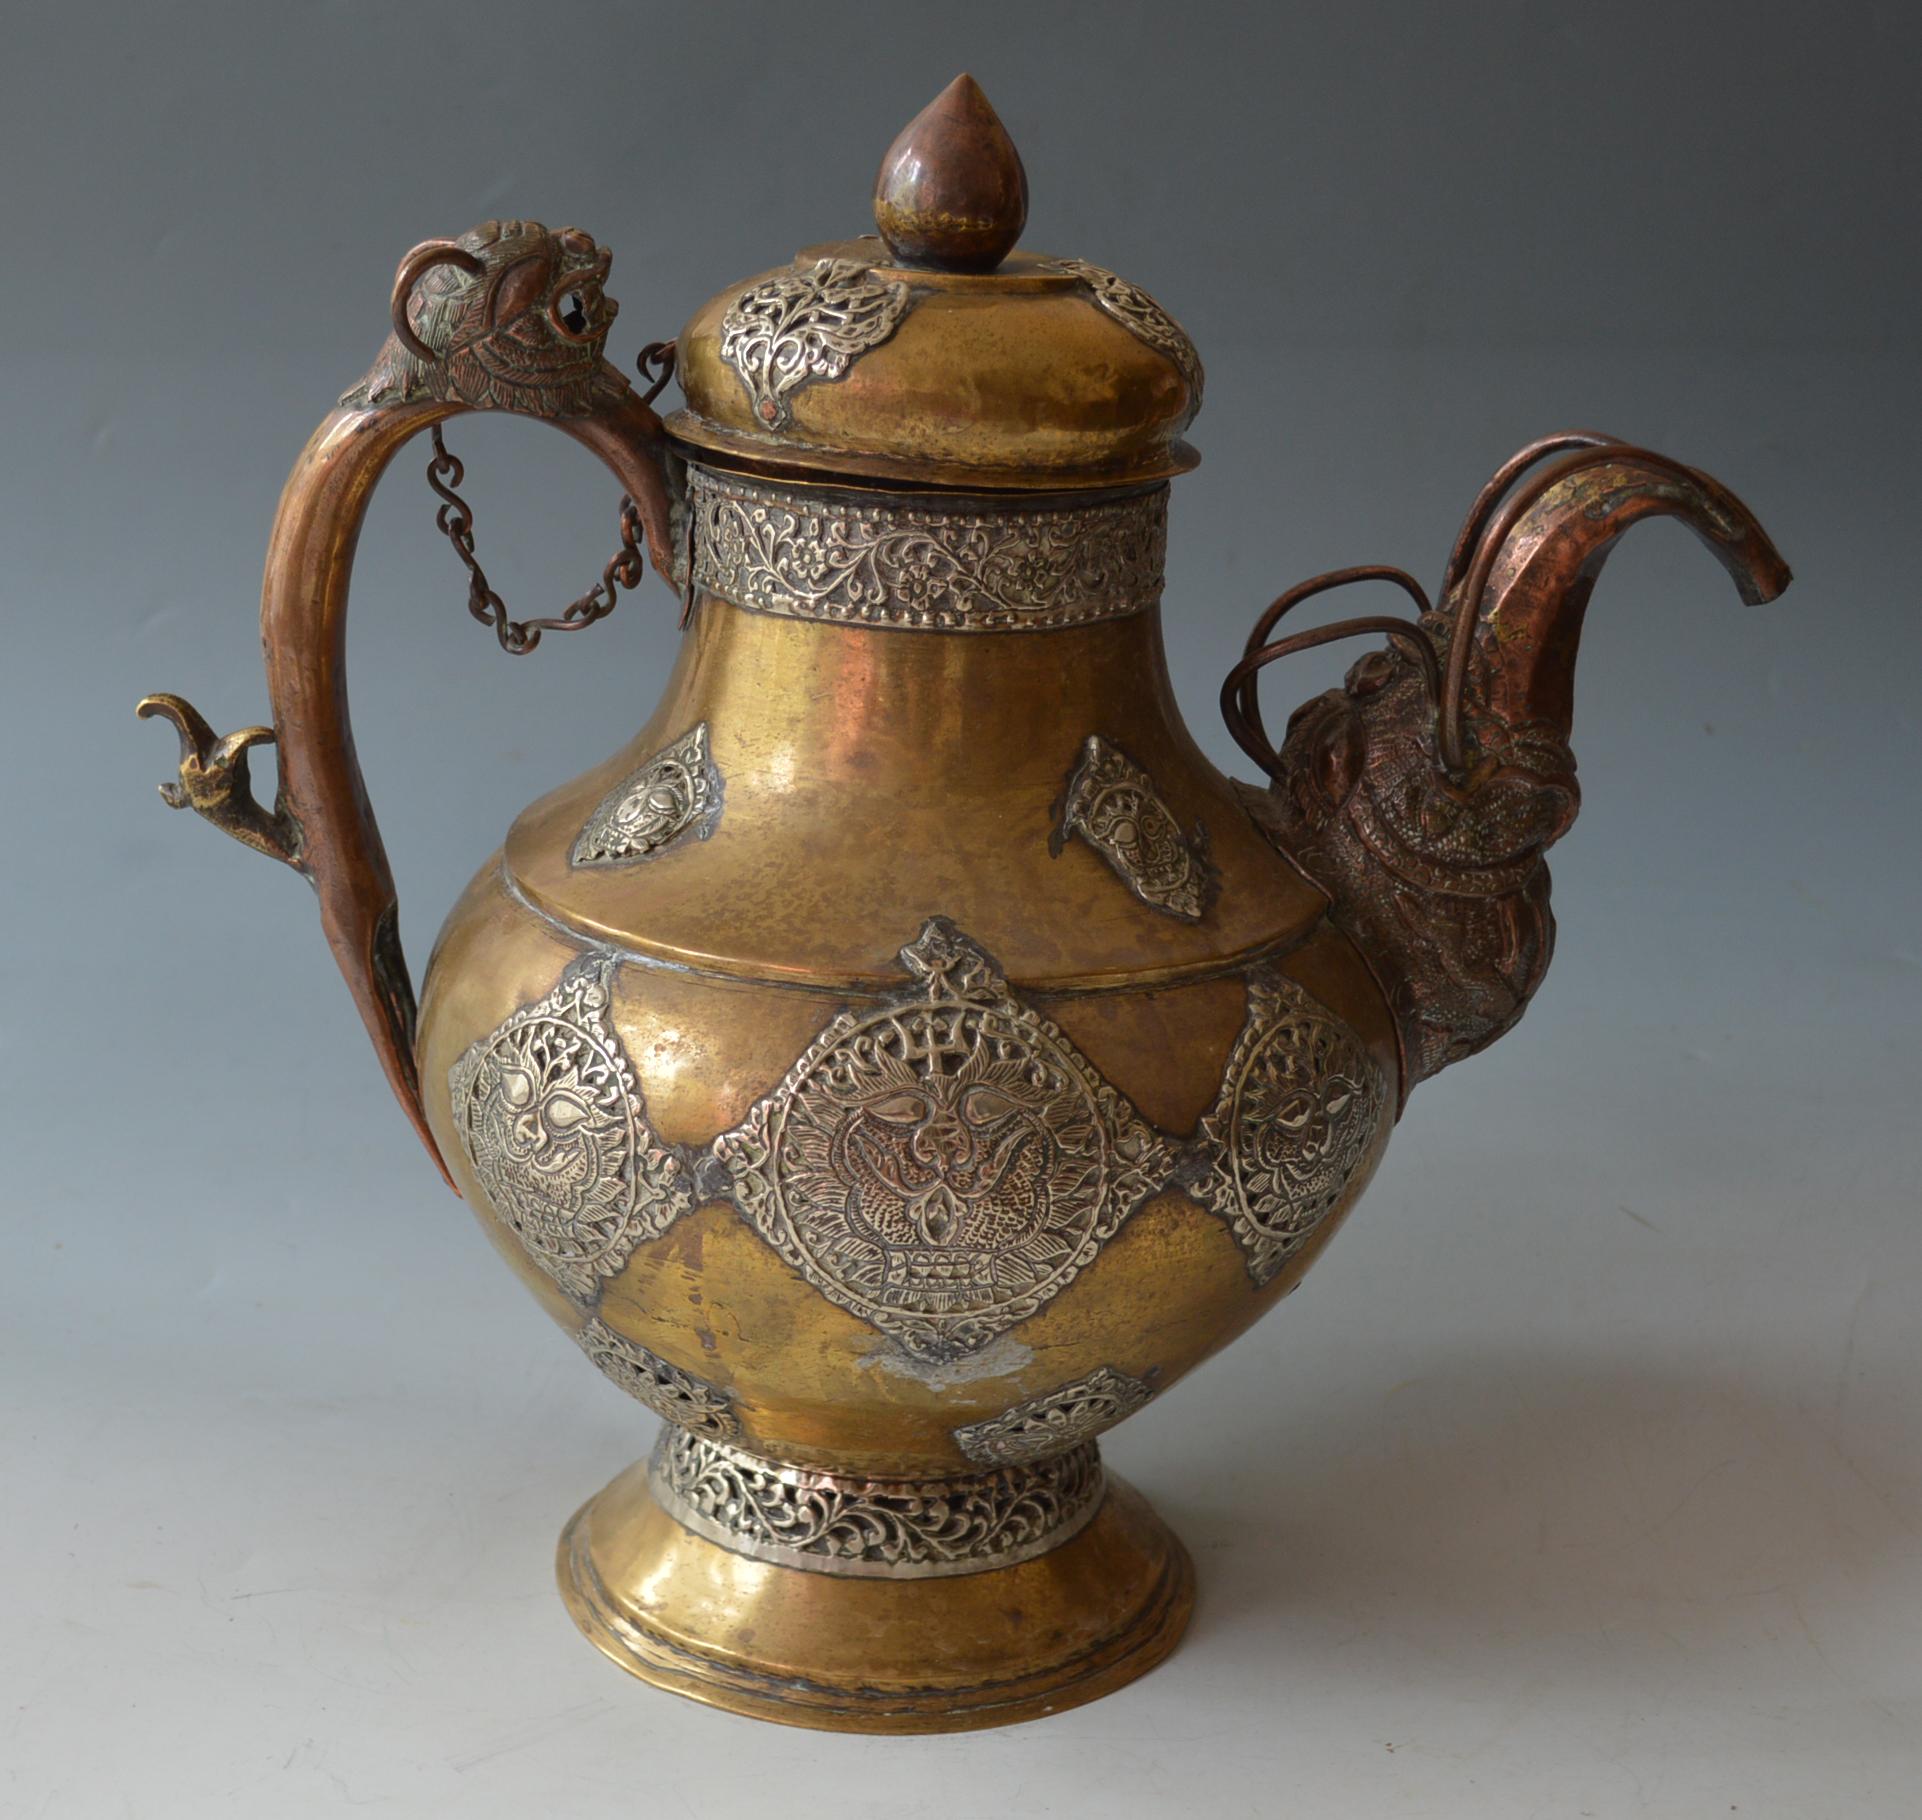 A Fine Large Antique Tibetan Tea pot
A fine rare Large handsome teapot of bulbous form Dragon handle with elephant spout crafted in brass copper with silver Buddhist medallions
H 40 cm w 38 cm Period 19th century
Condition : Good.